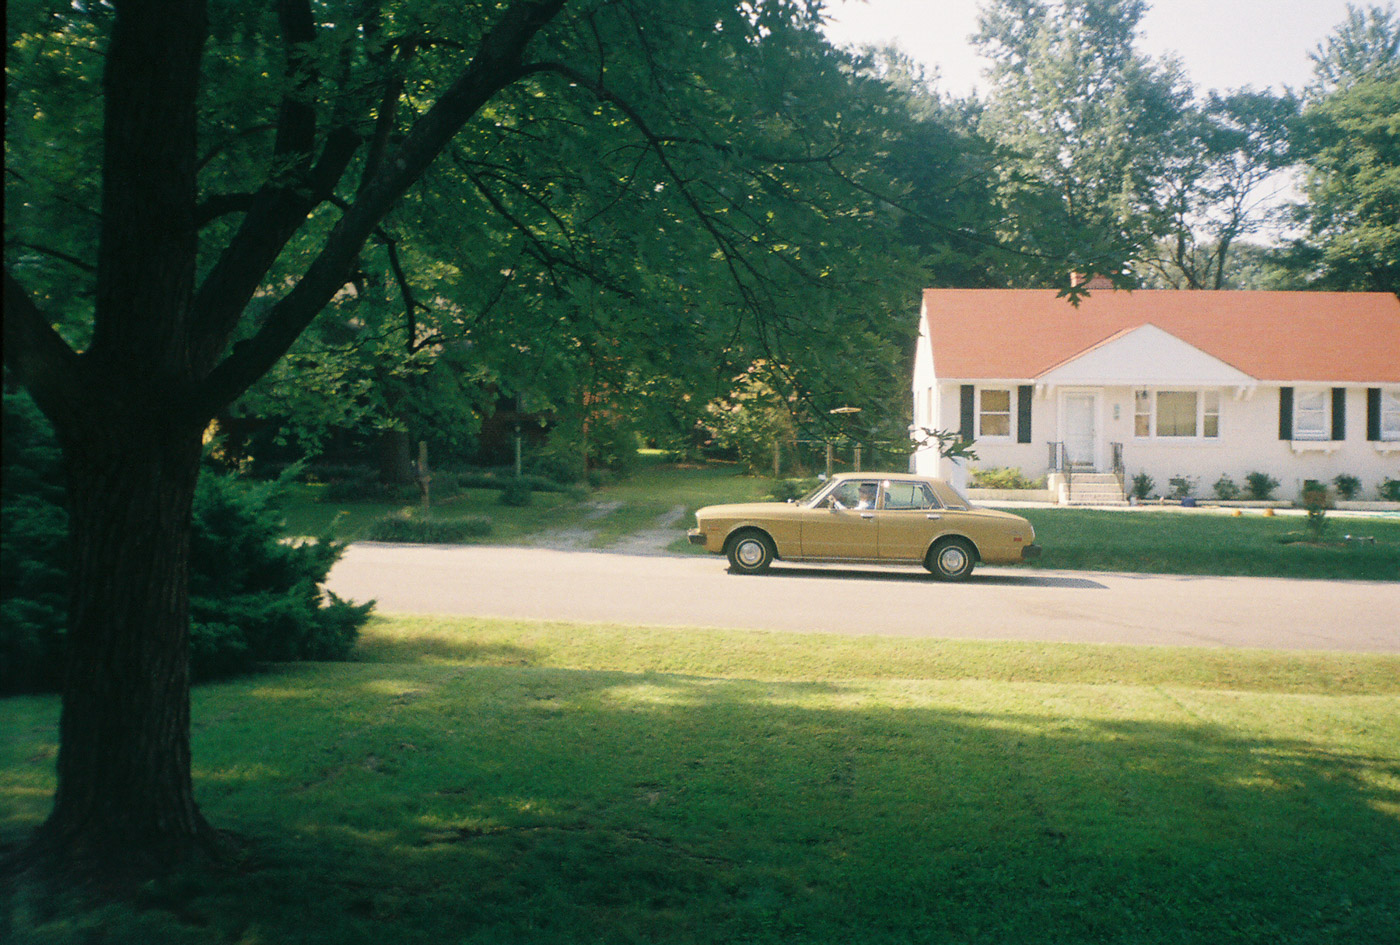 Dad driving the Cressida to work, circa March 2006